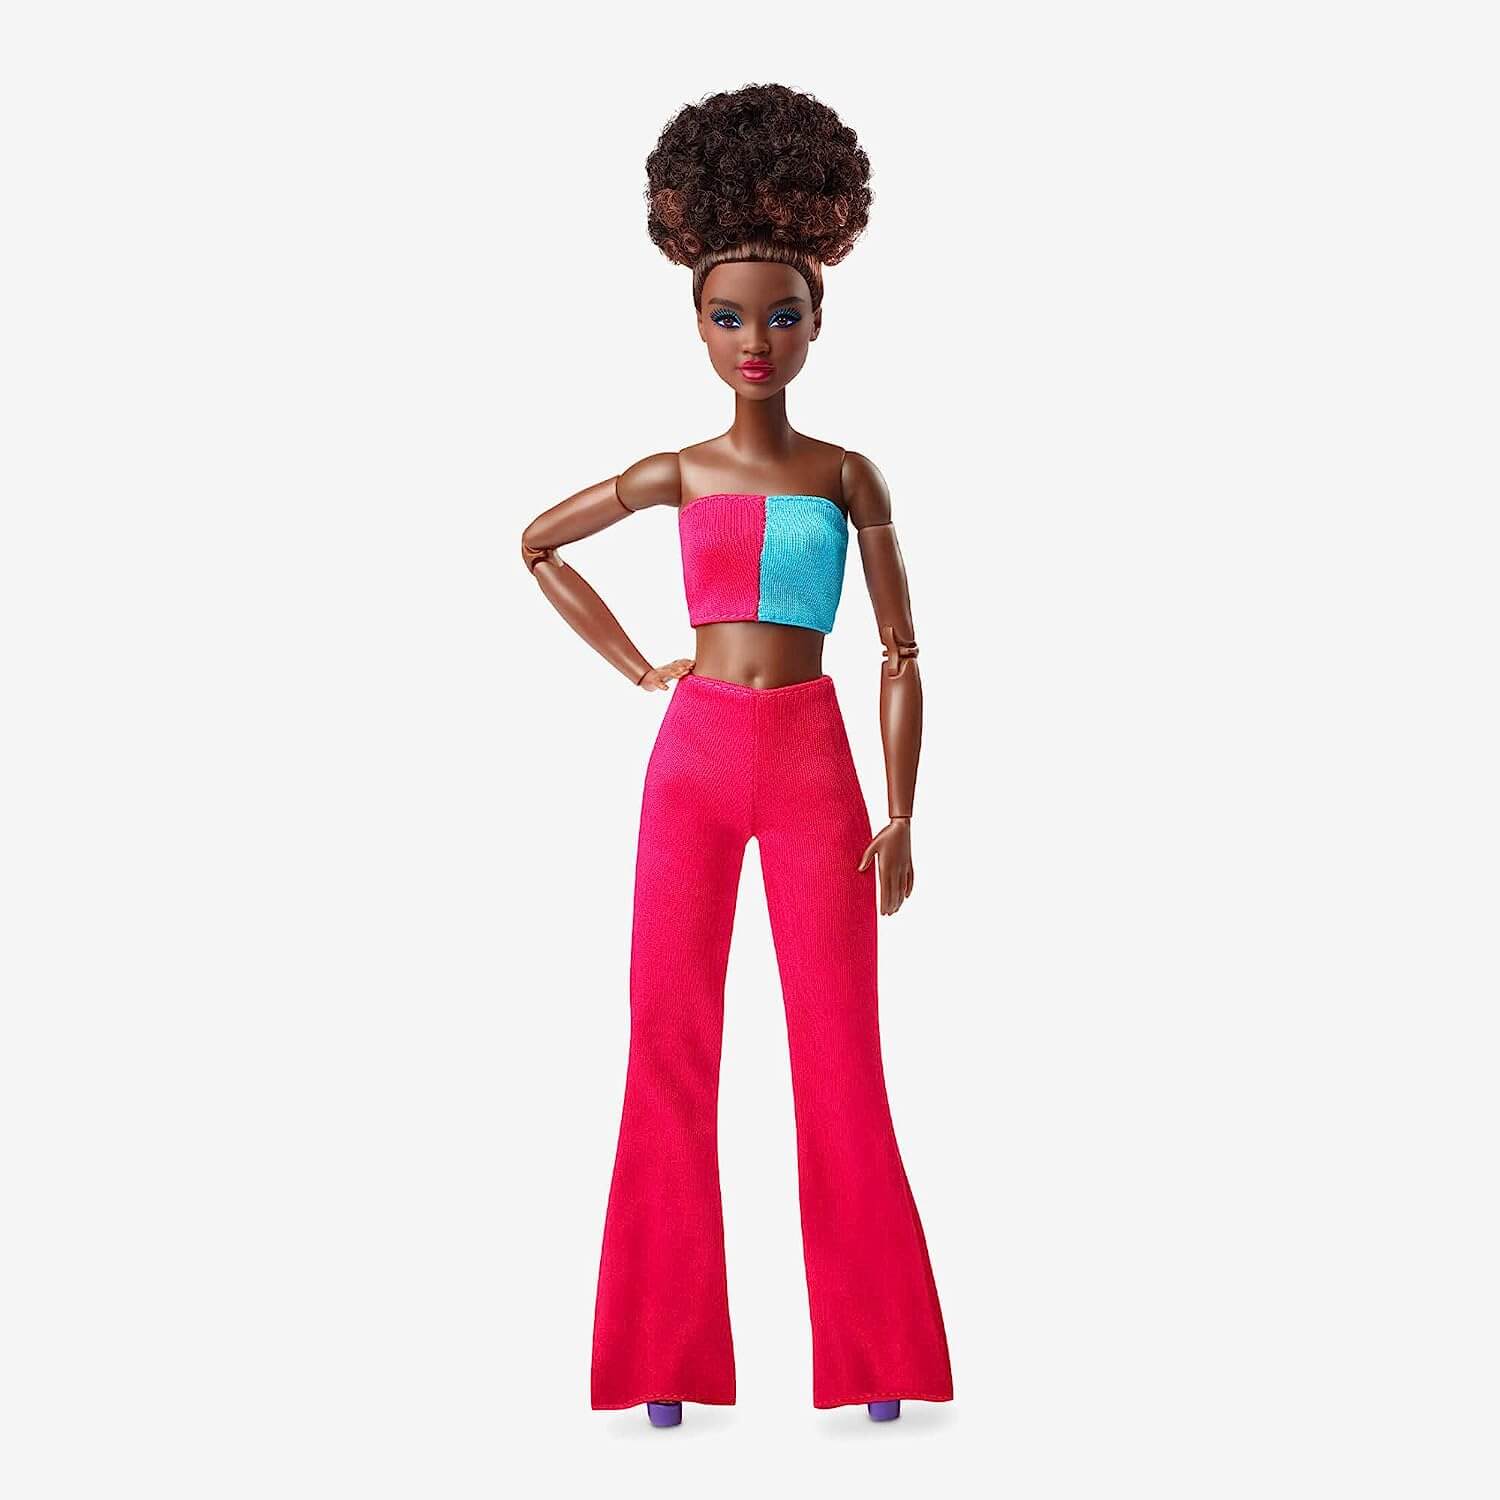 One of today's Black Barbie dolls